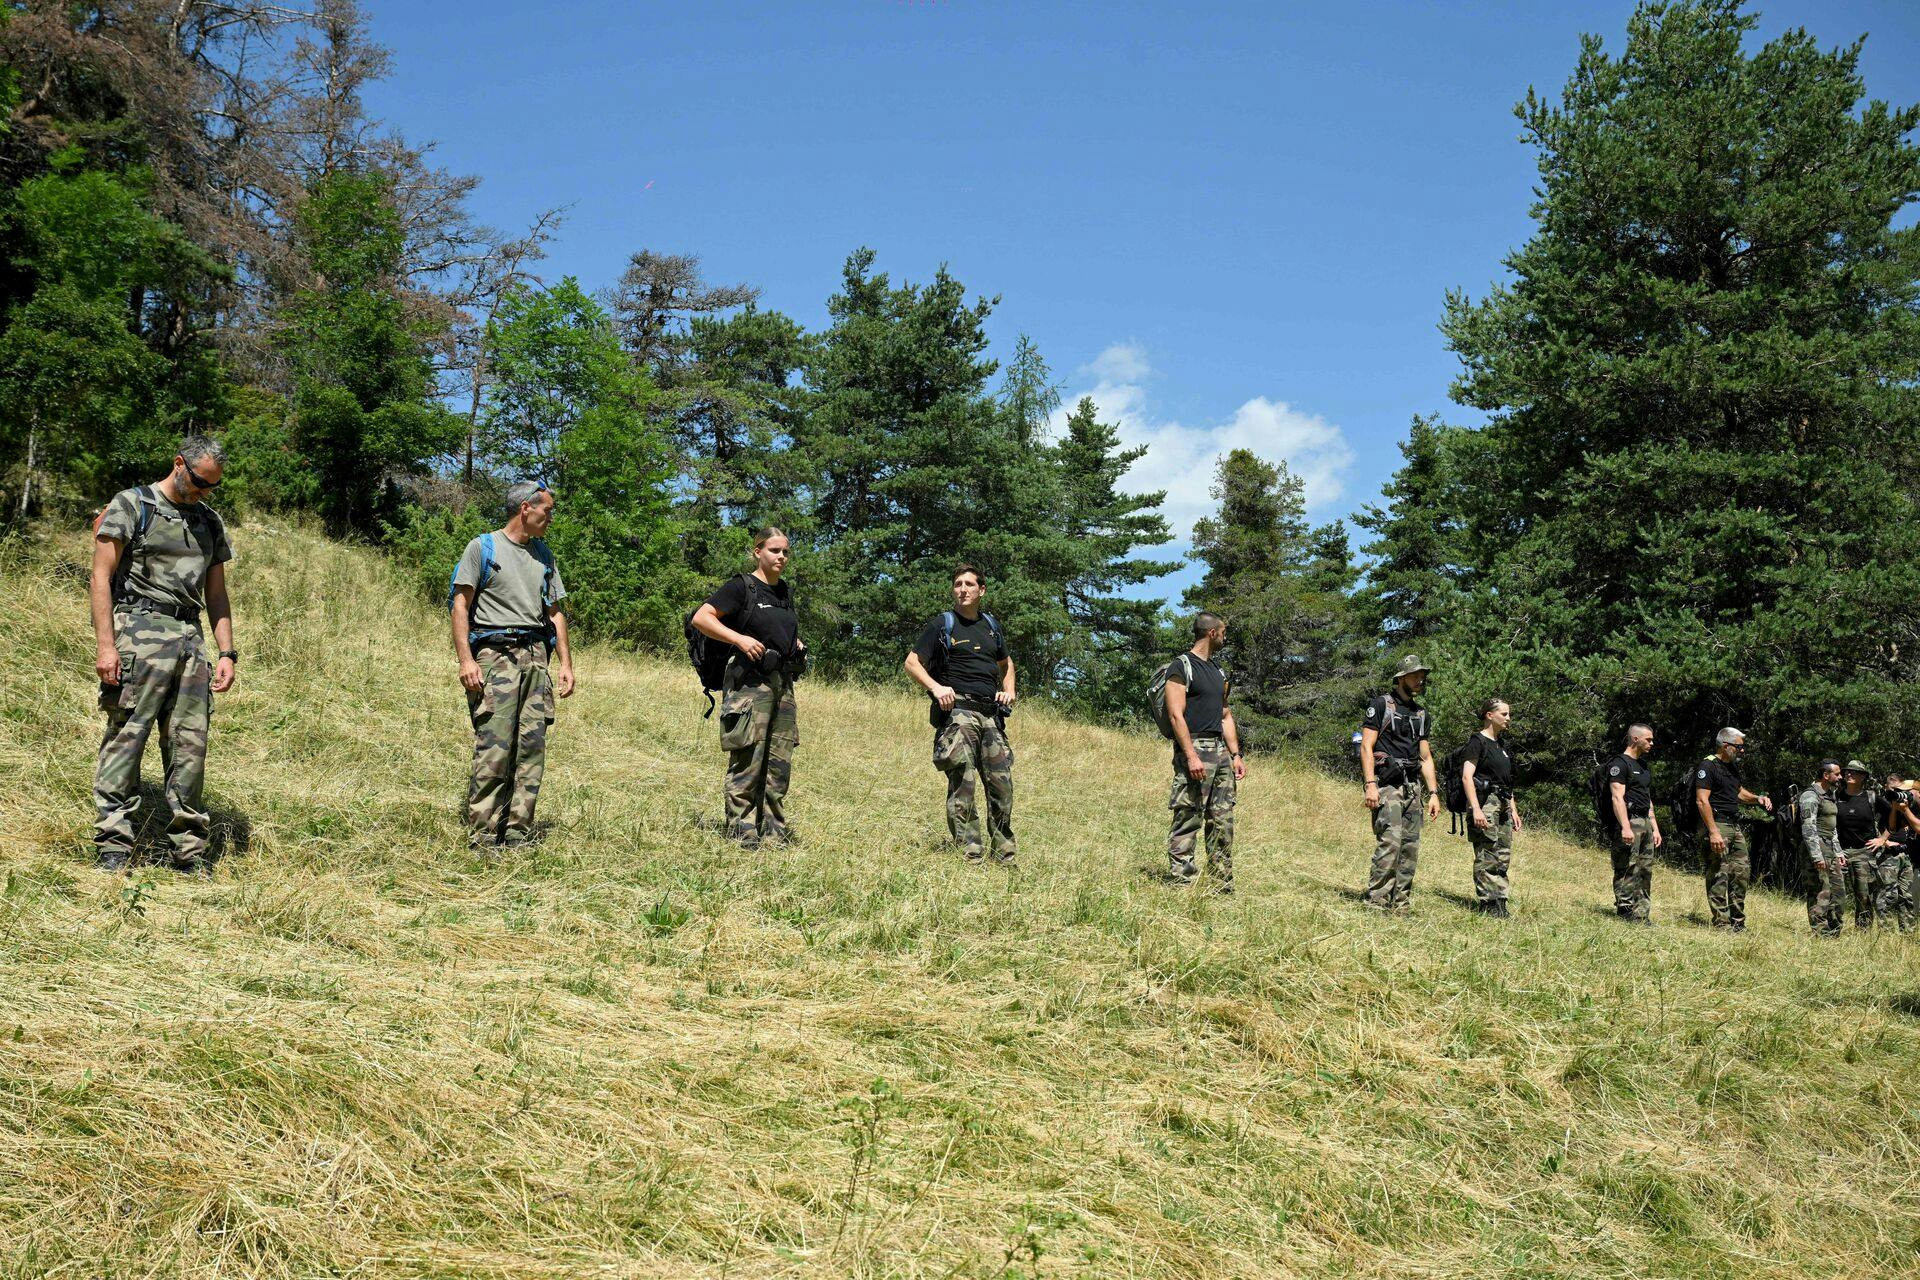 French gendarmes take part in a search operation for two-and-a-half-year-old Emile who is reported missing for two days, on July 10, 2023 in the French southern Alps village of Le Vernet. Emile was last seen playing in the garden at his grandparents' house on July 8, 2023. The scope of research has been extended, the Mayor said on Monday 10, 2023. (Photo by NICOLAS TUCAT / AFP)